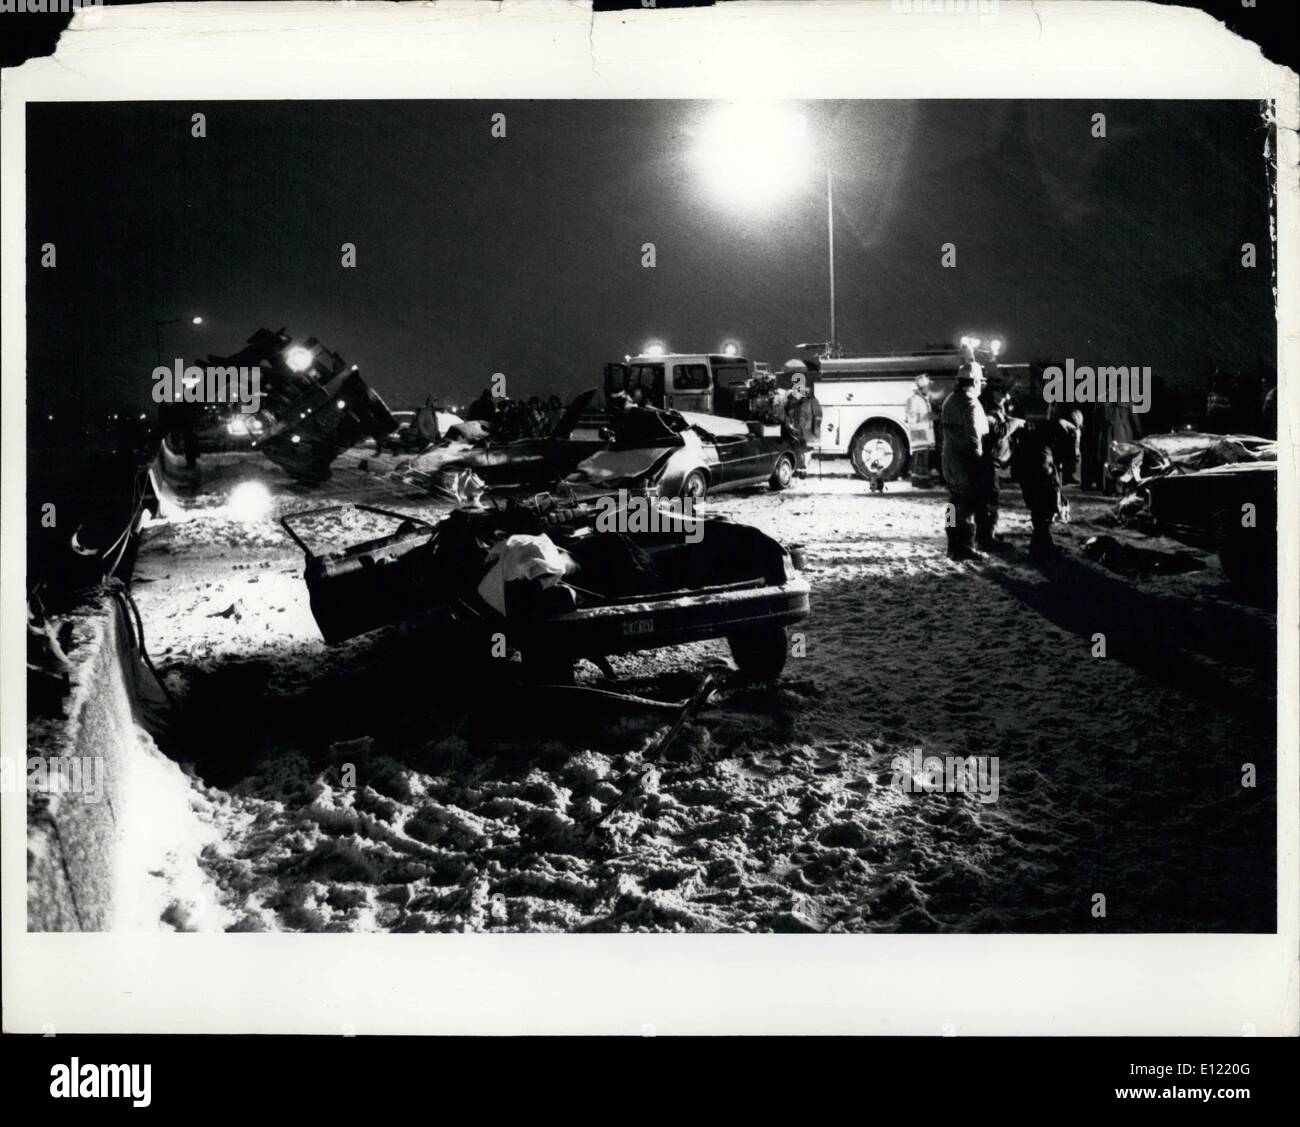 Jan. 01, 1982 - Damaged Cars and Bridge: Cars with their roofs crushed or completely torn off are strewn on the 14th street bridge after being hit by a Florida 727 jet crashed on takeoff .The Plane just left National Airport. The plane struck the cars on the bridge during rush hour traffic and then crashed in the river and quickly sunk. Most of the passengers are still trapped in the plane presumed dead. Stock Photo